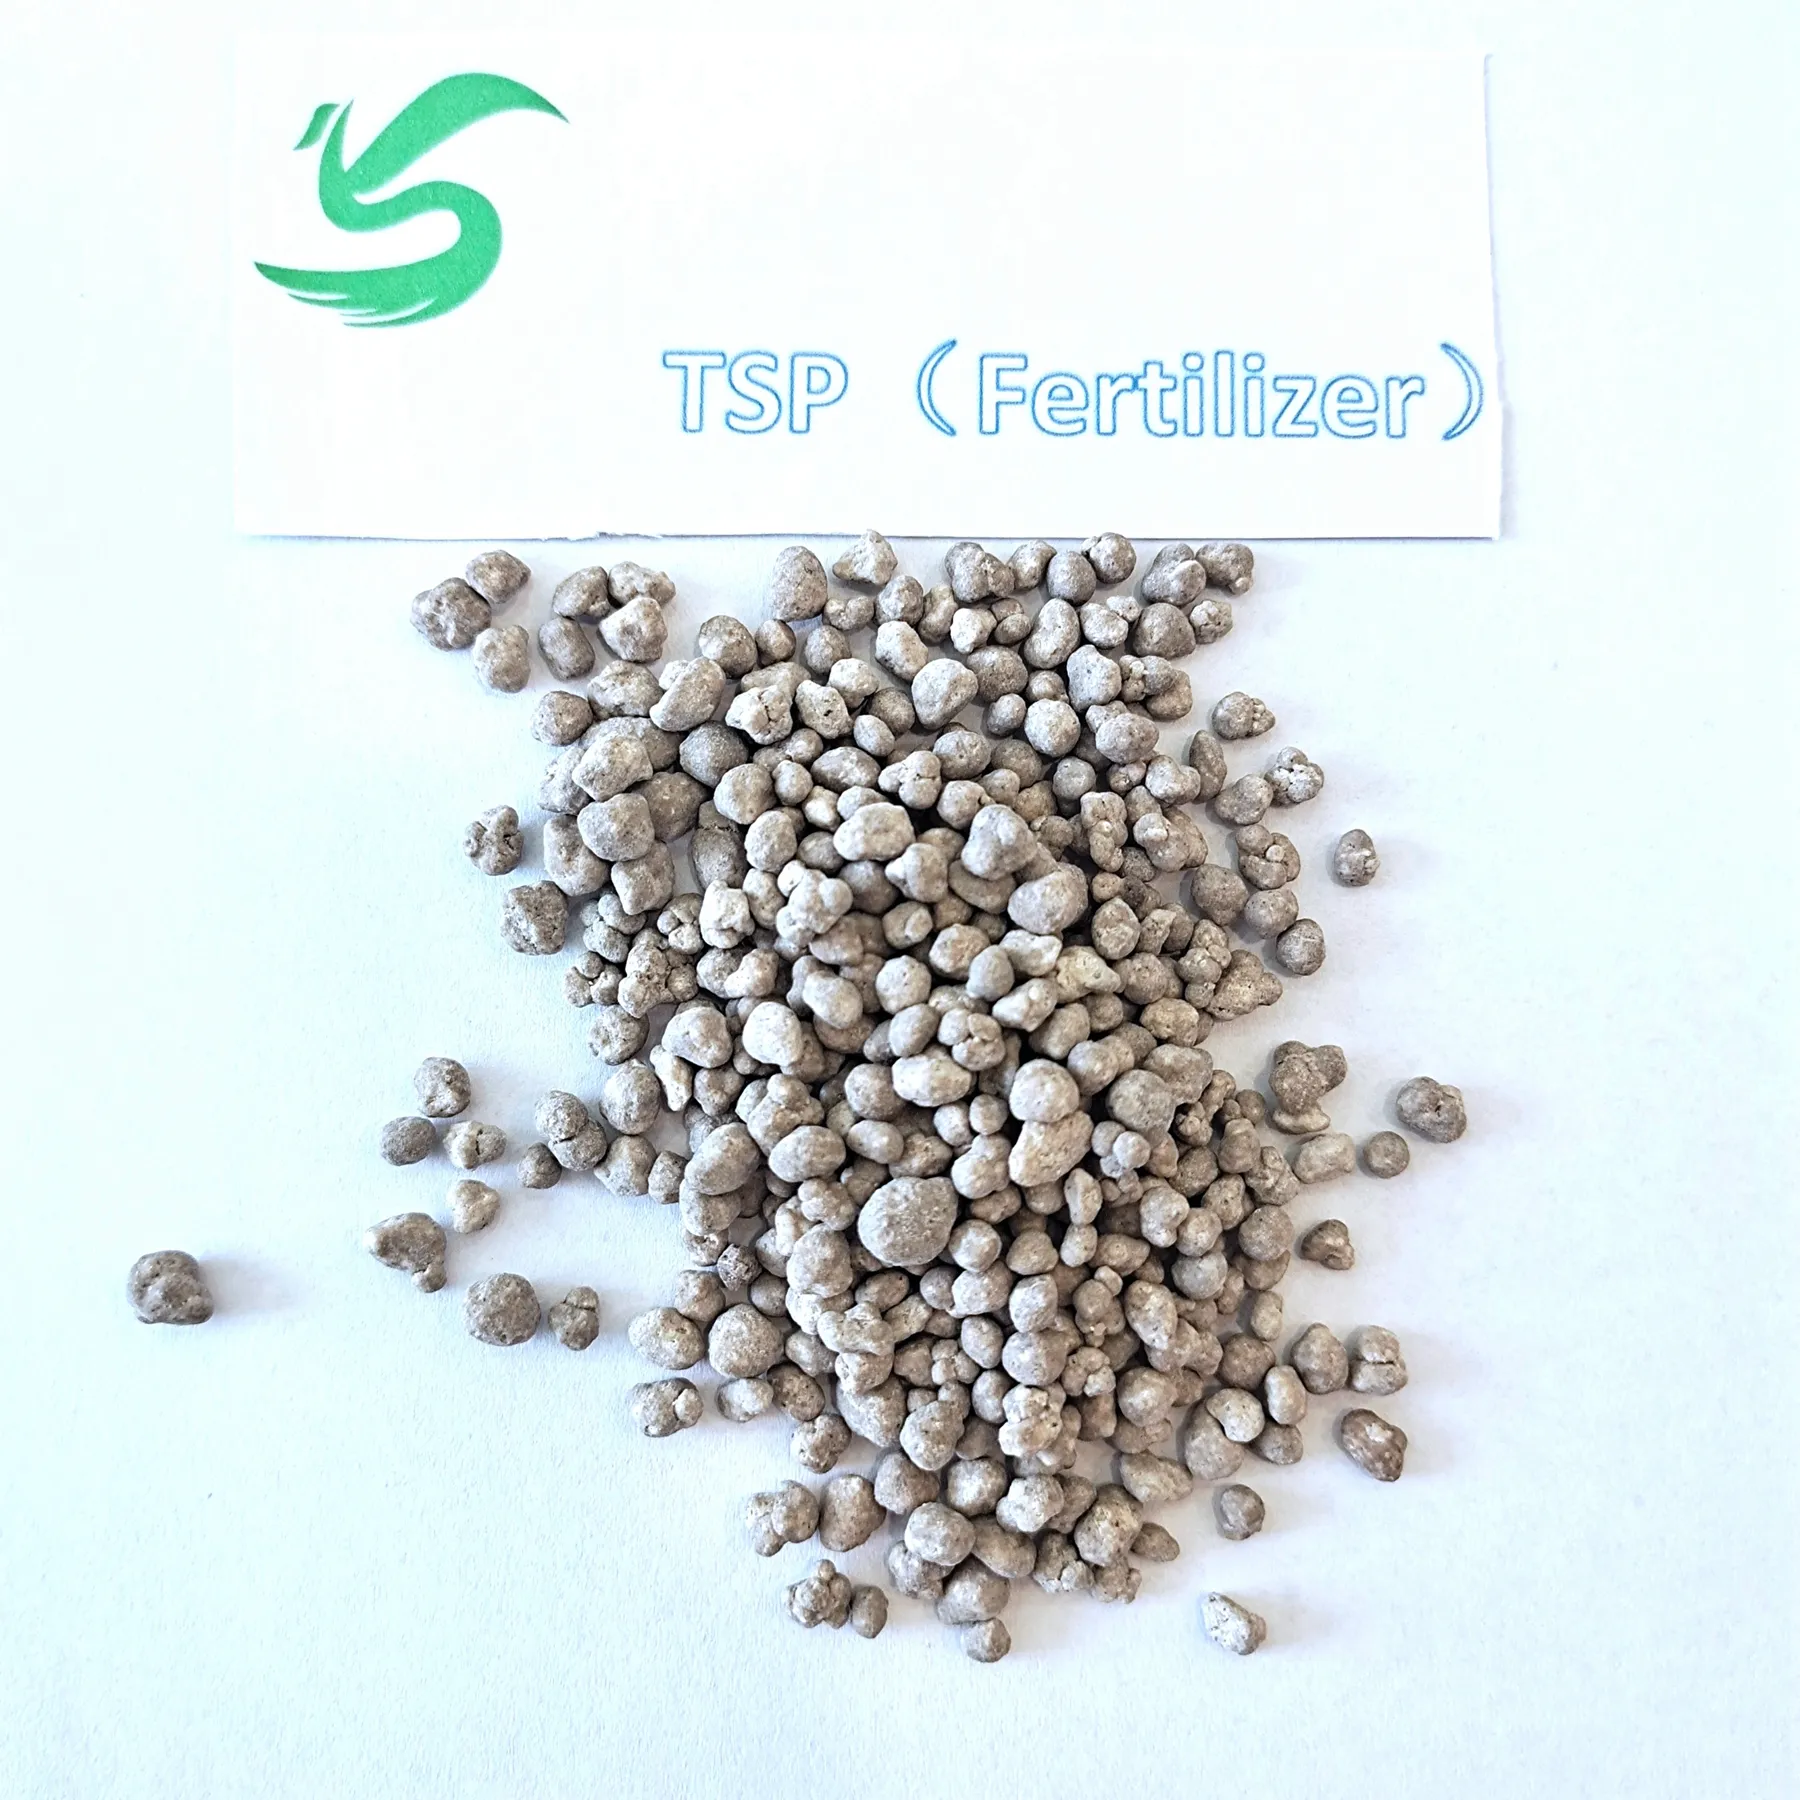 Low price TSP Triple Super Phosphate agricultural high efficiency fertilizer high purity 46% P2O5